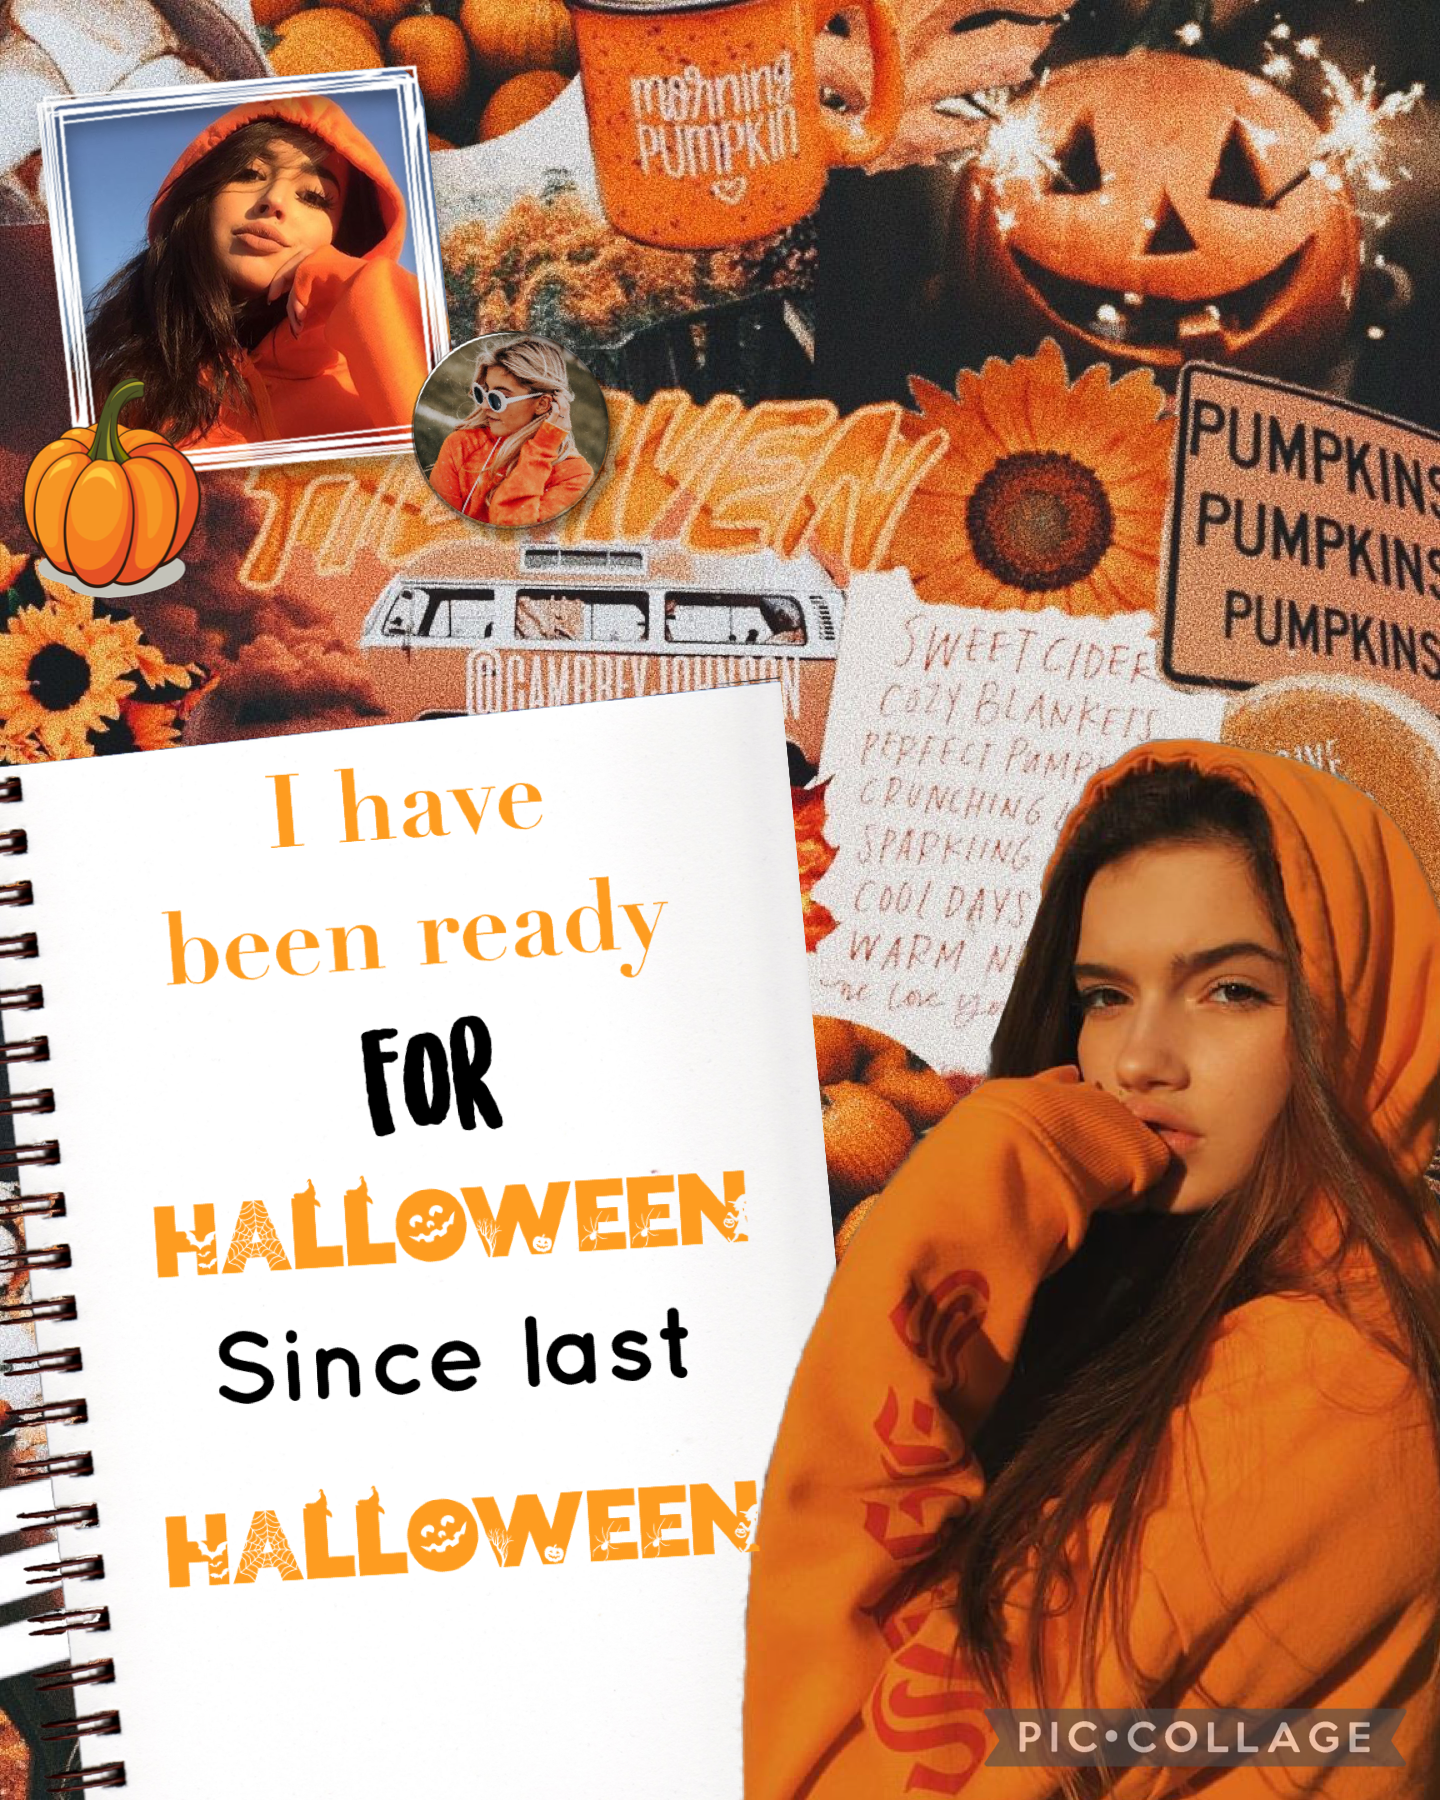 🧡 Oct 23 2021 🧡

Made this collage for -a-n-g-e-l- 's halloween contest! It’s been a while since I made one :> I gave my best! Feedback in the comments pls! :)